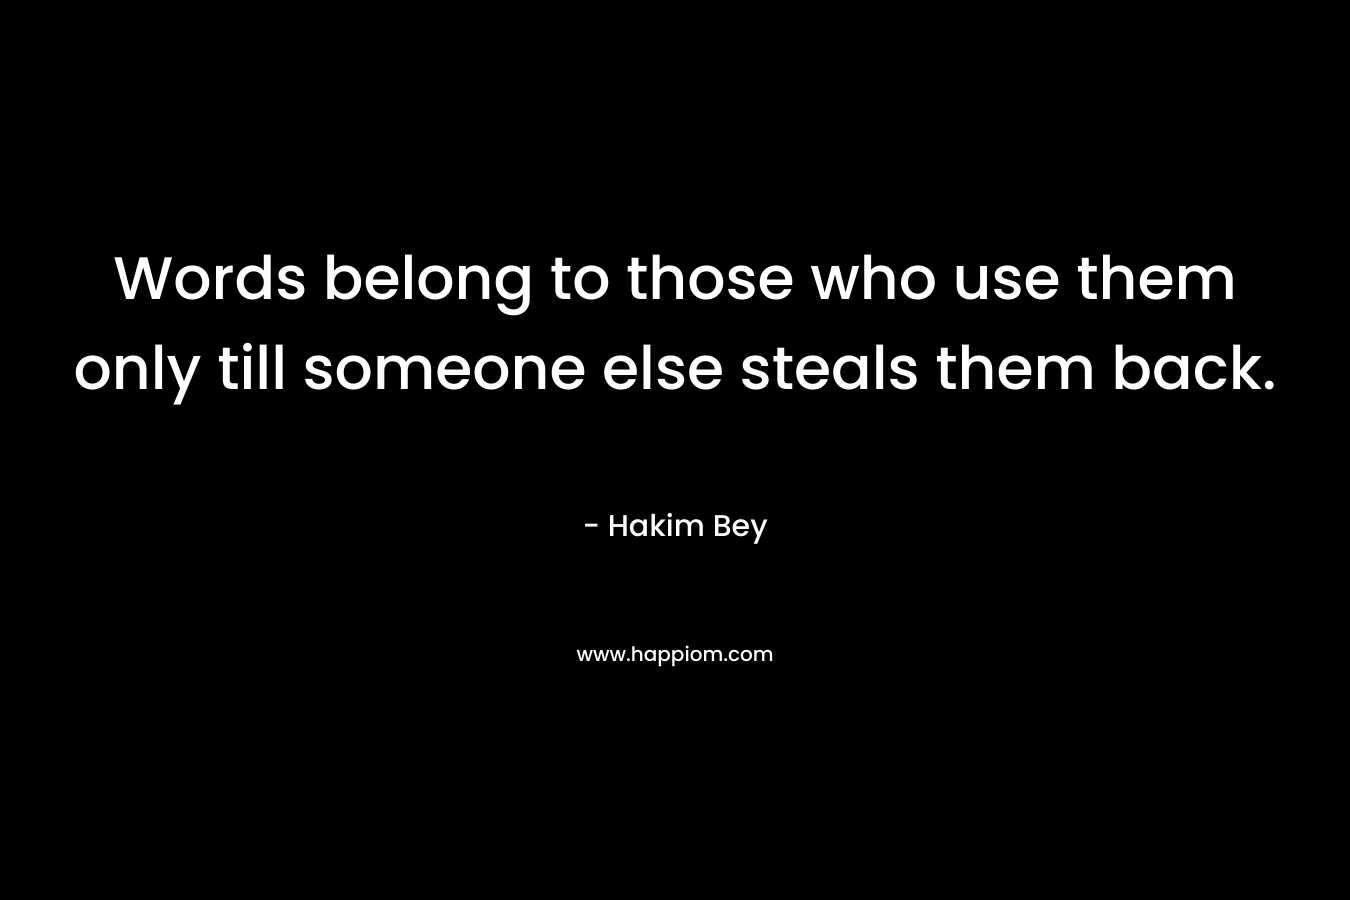 Words belong to those who use them only till someone else steals them back.